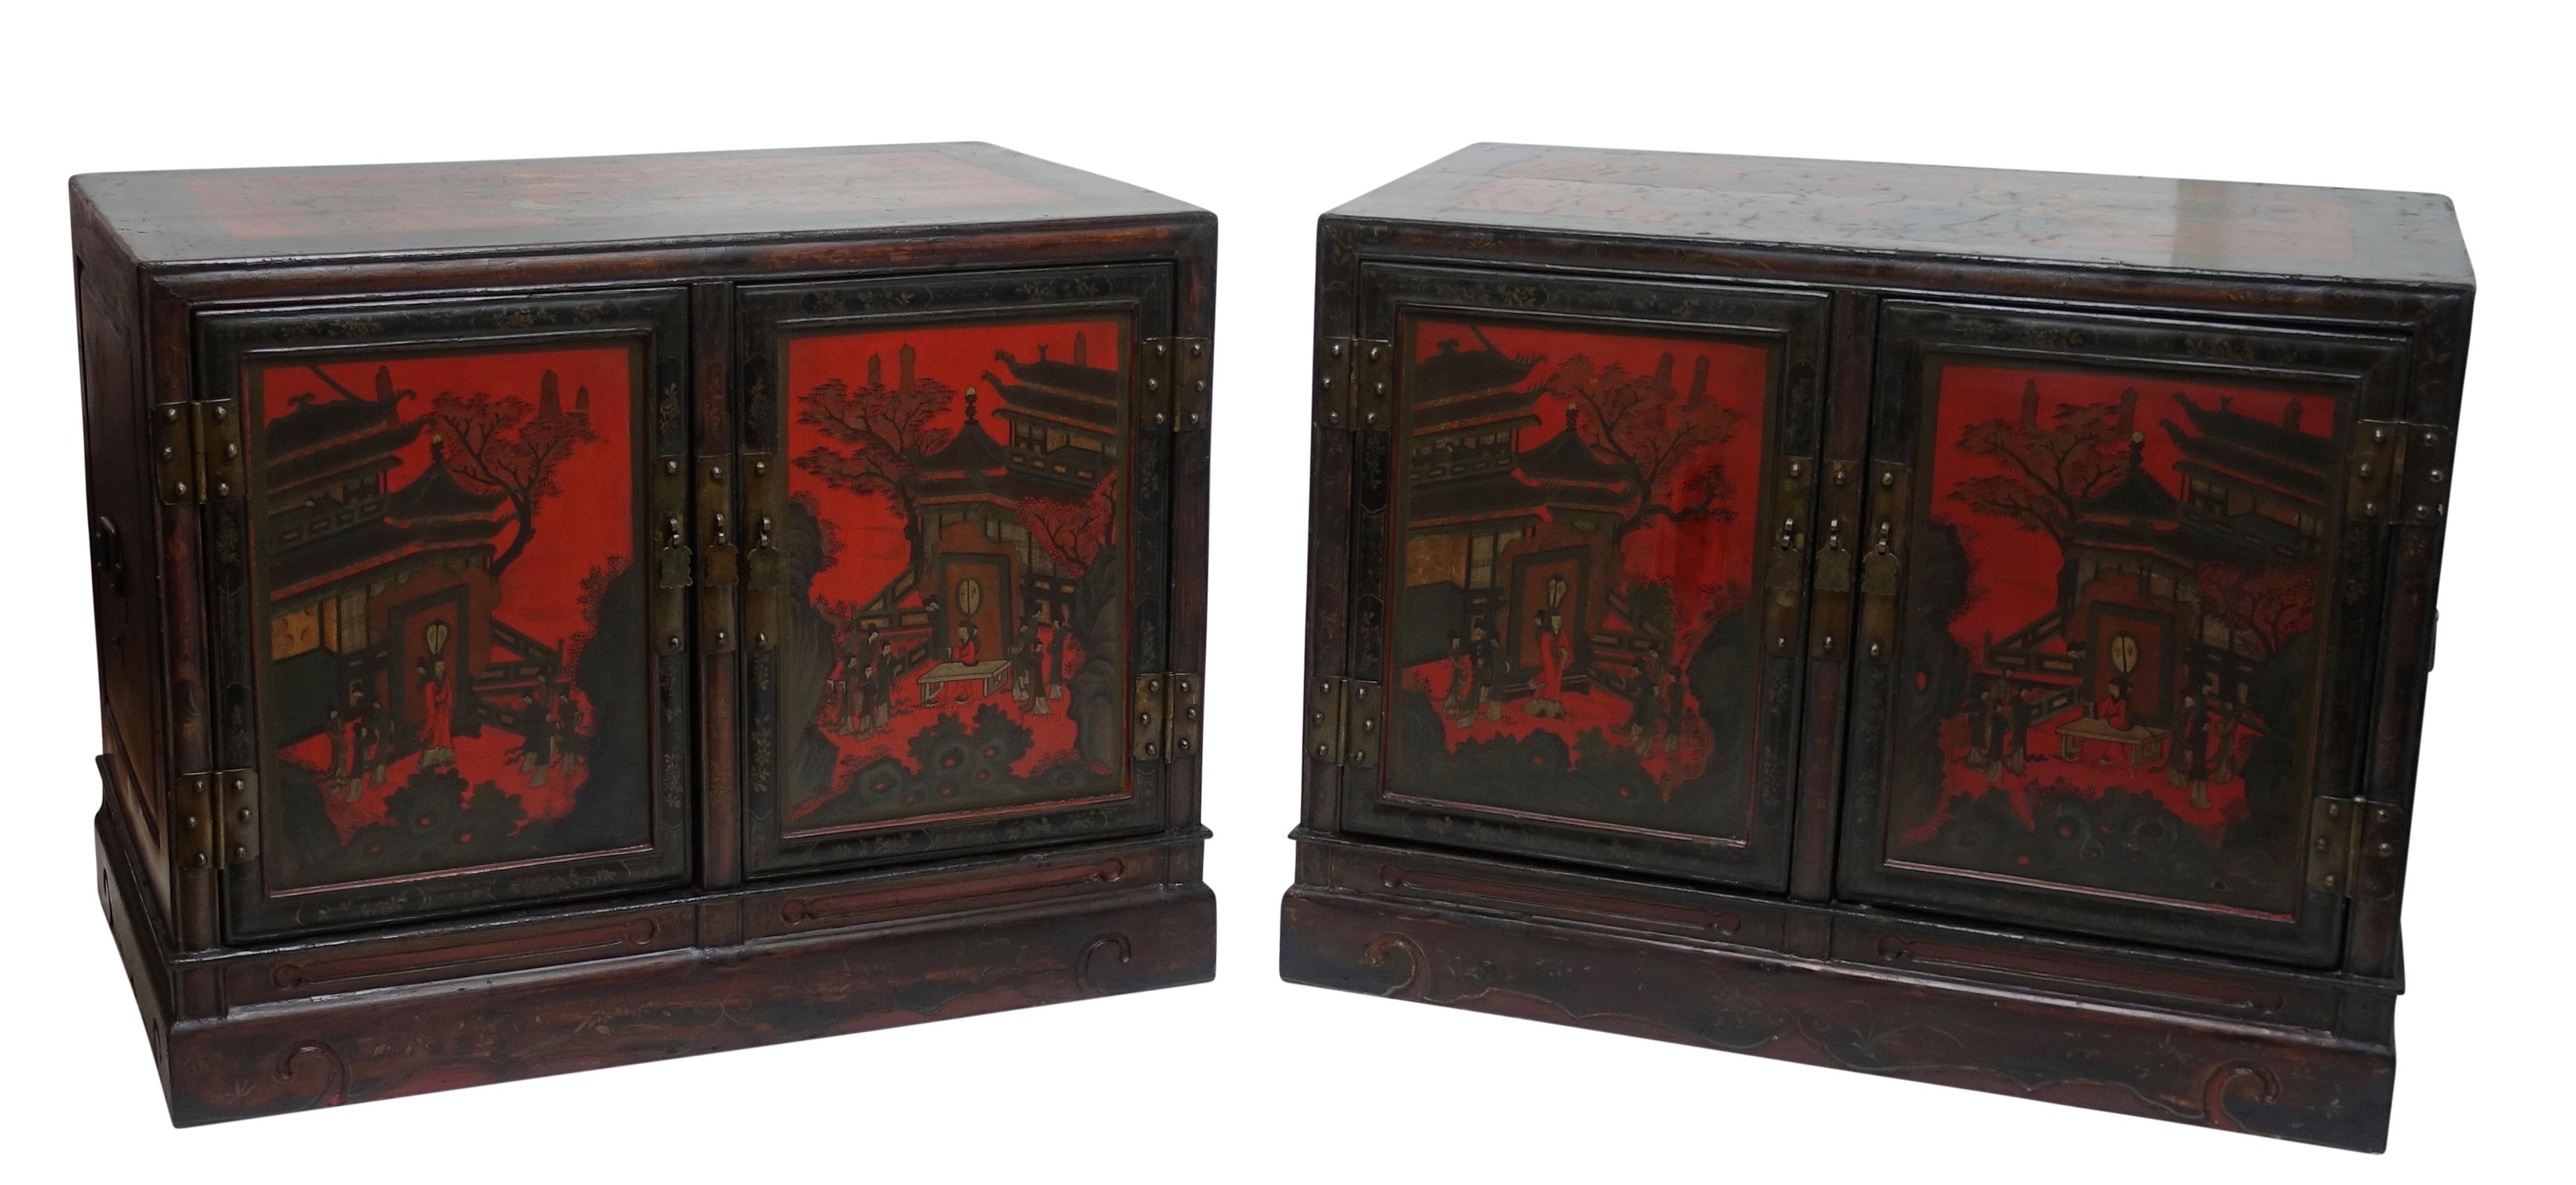 Pair of Chinese Lacquer Robe Cabinets, Qing Dynasty, circa 1840 4